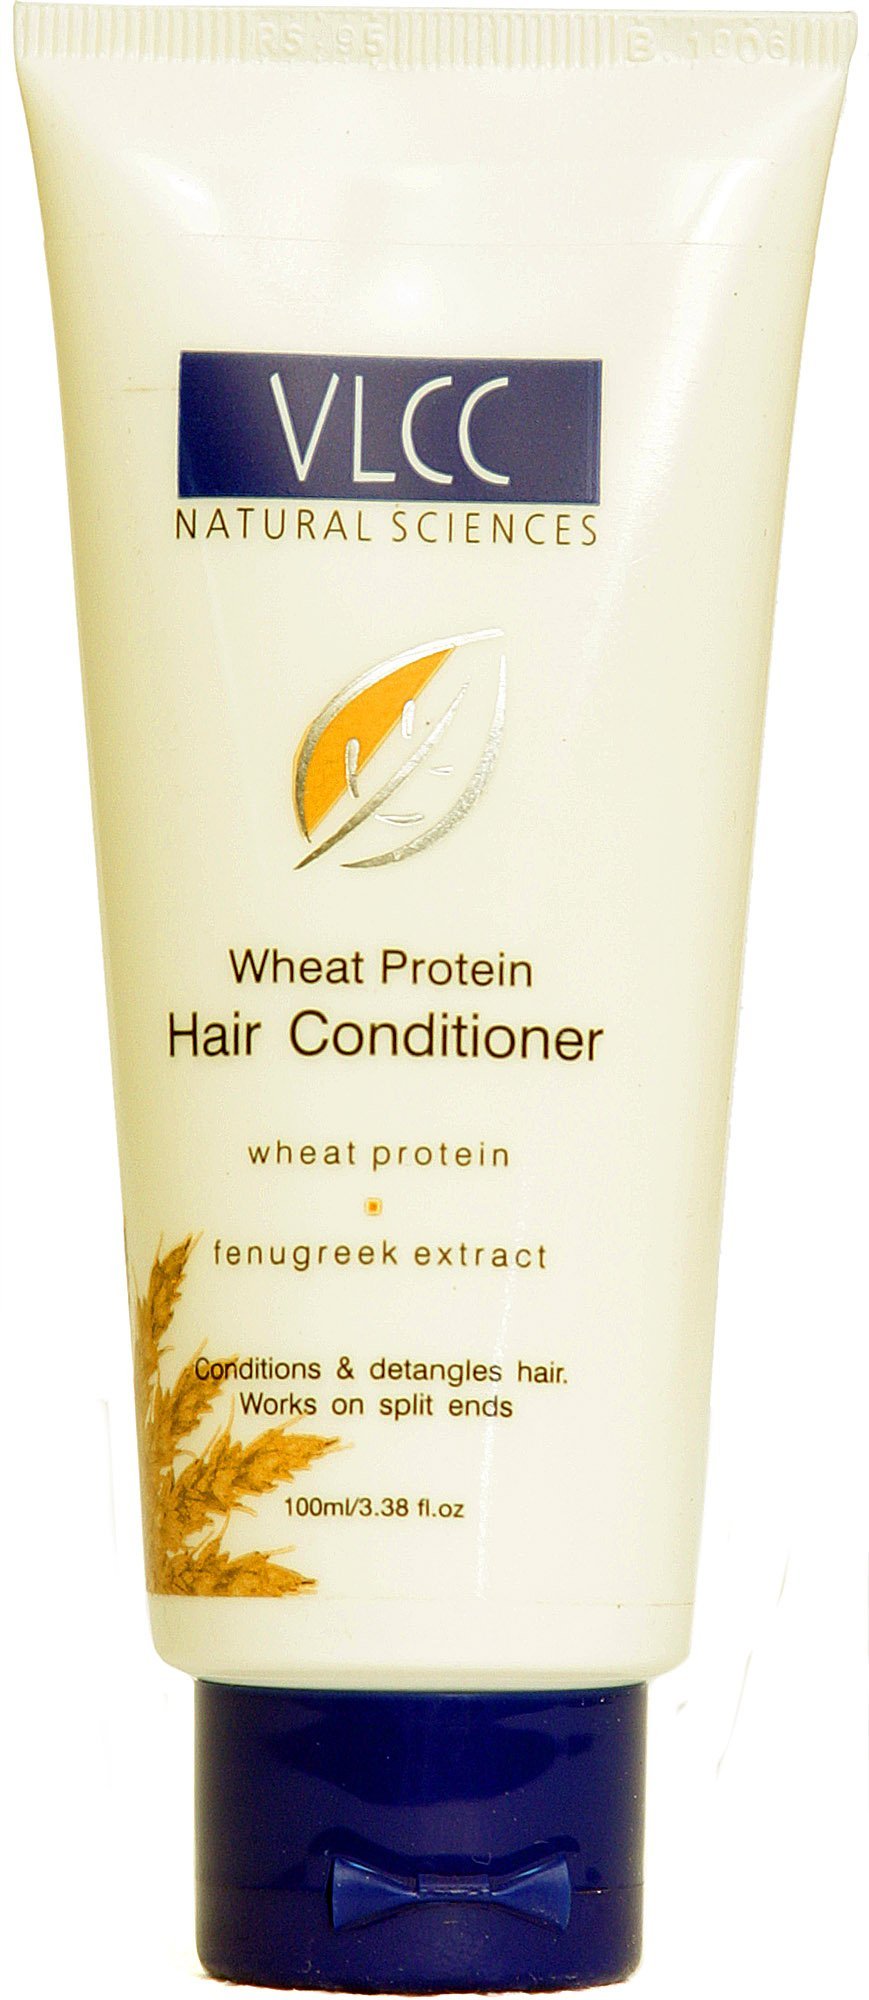 Wheat Protein Hair Conditioner - book cover